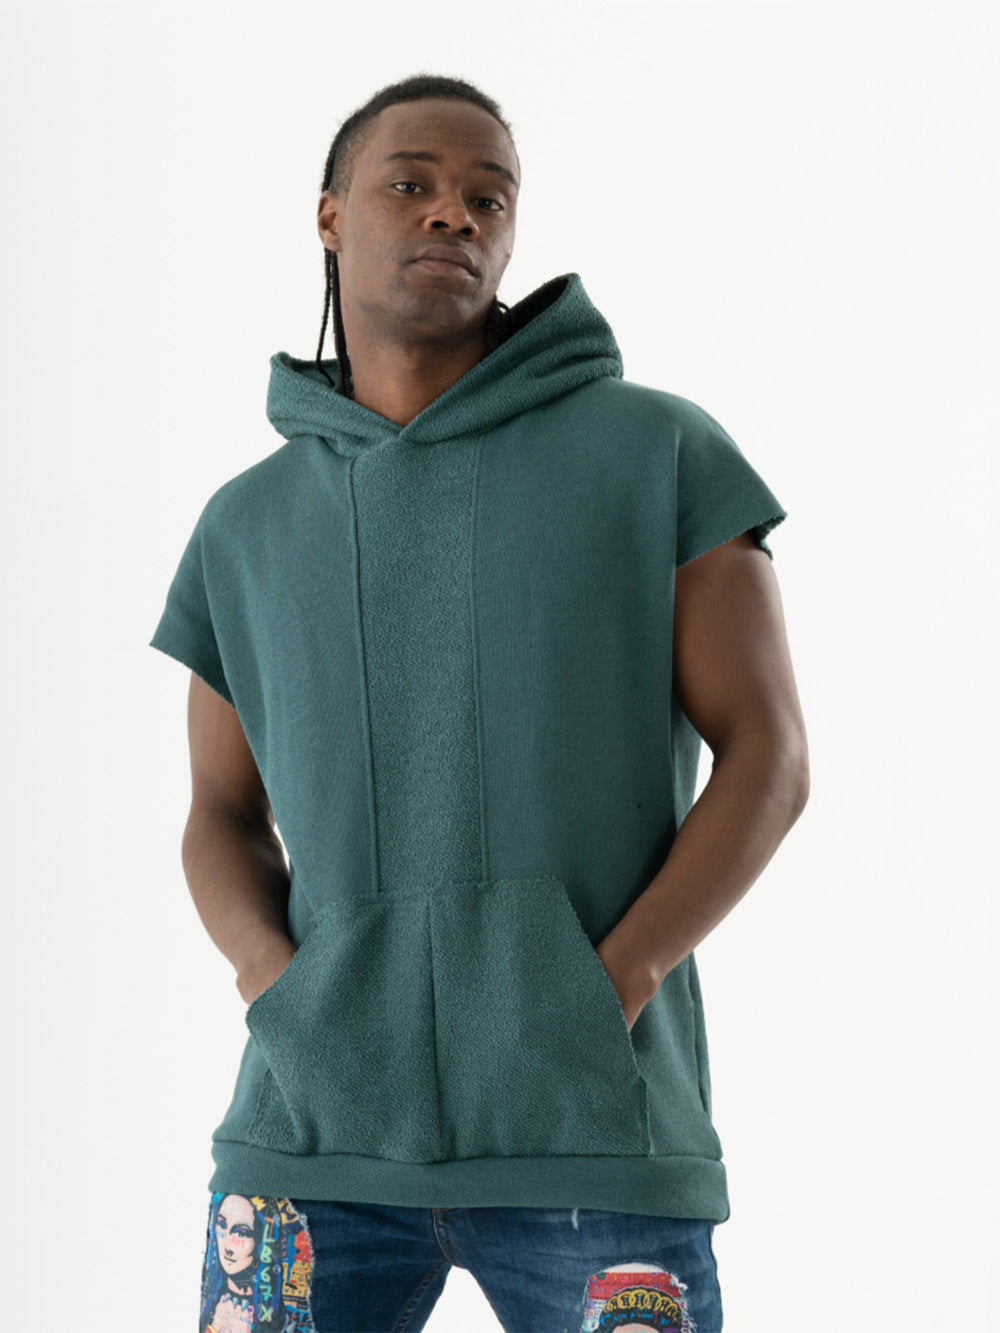 A man wearing a BACHELOR HOODIE | GREEN with a pouch pocket.